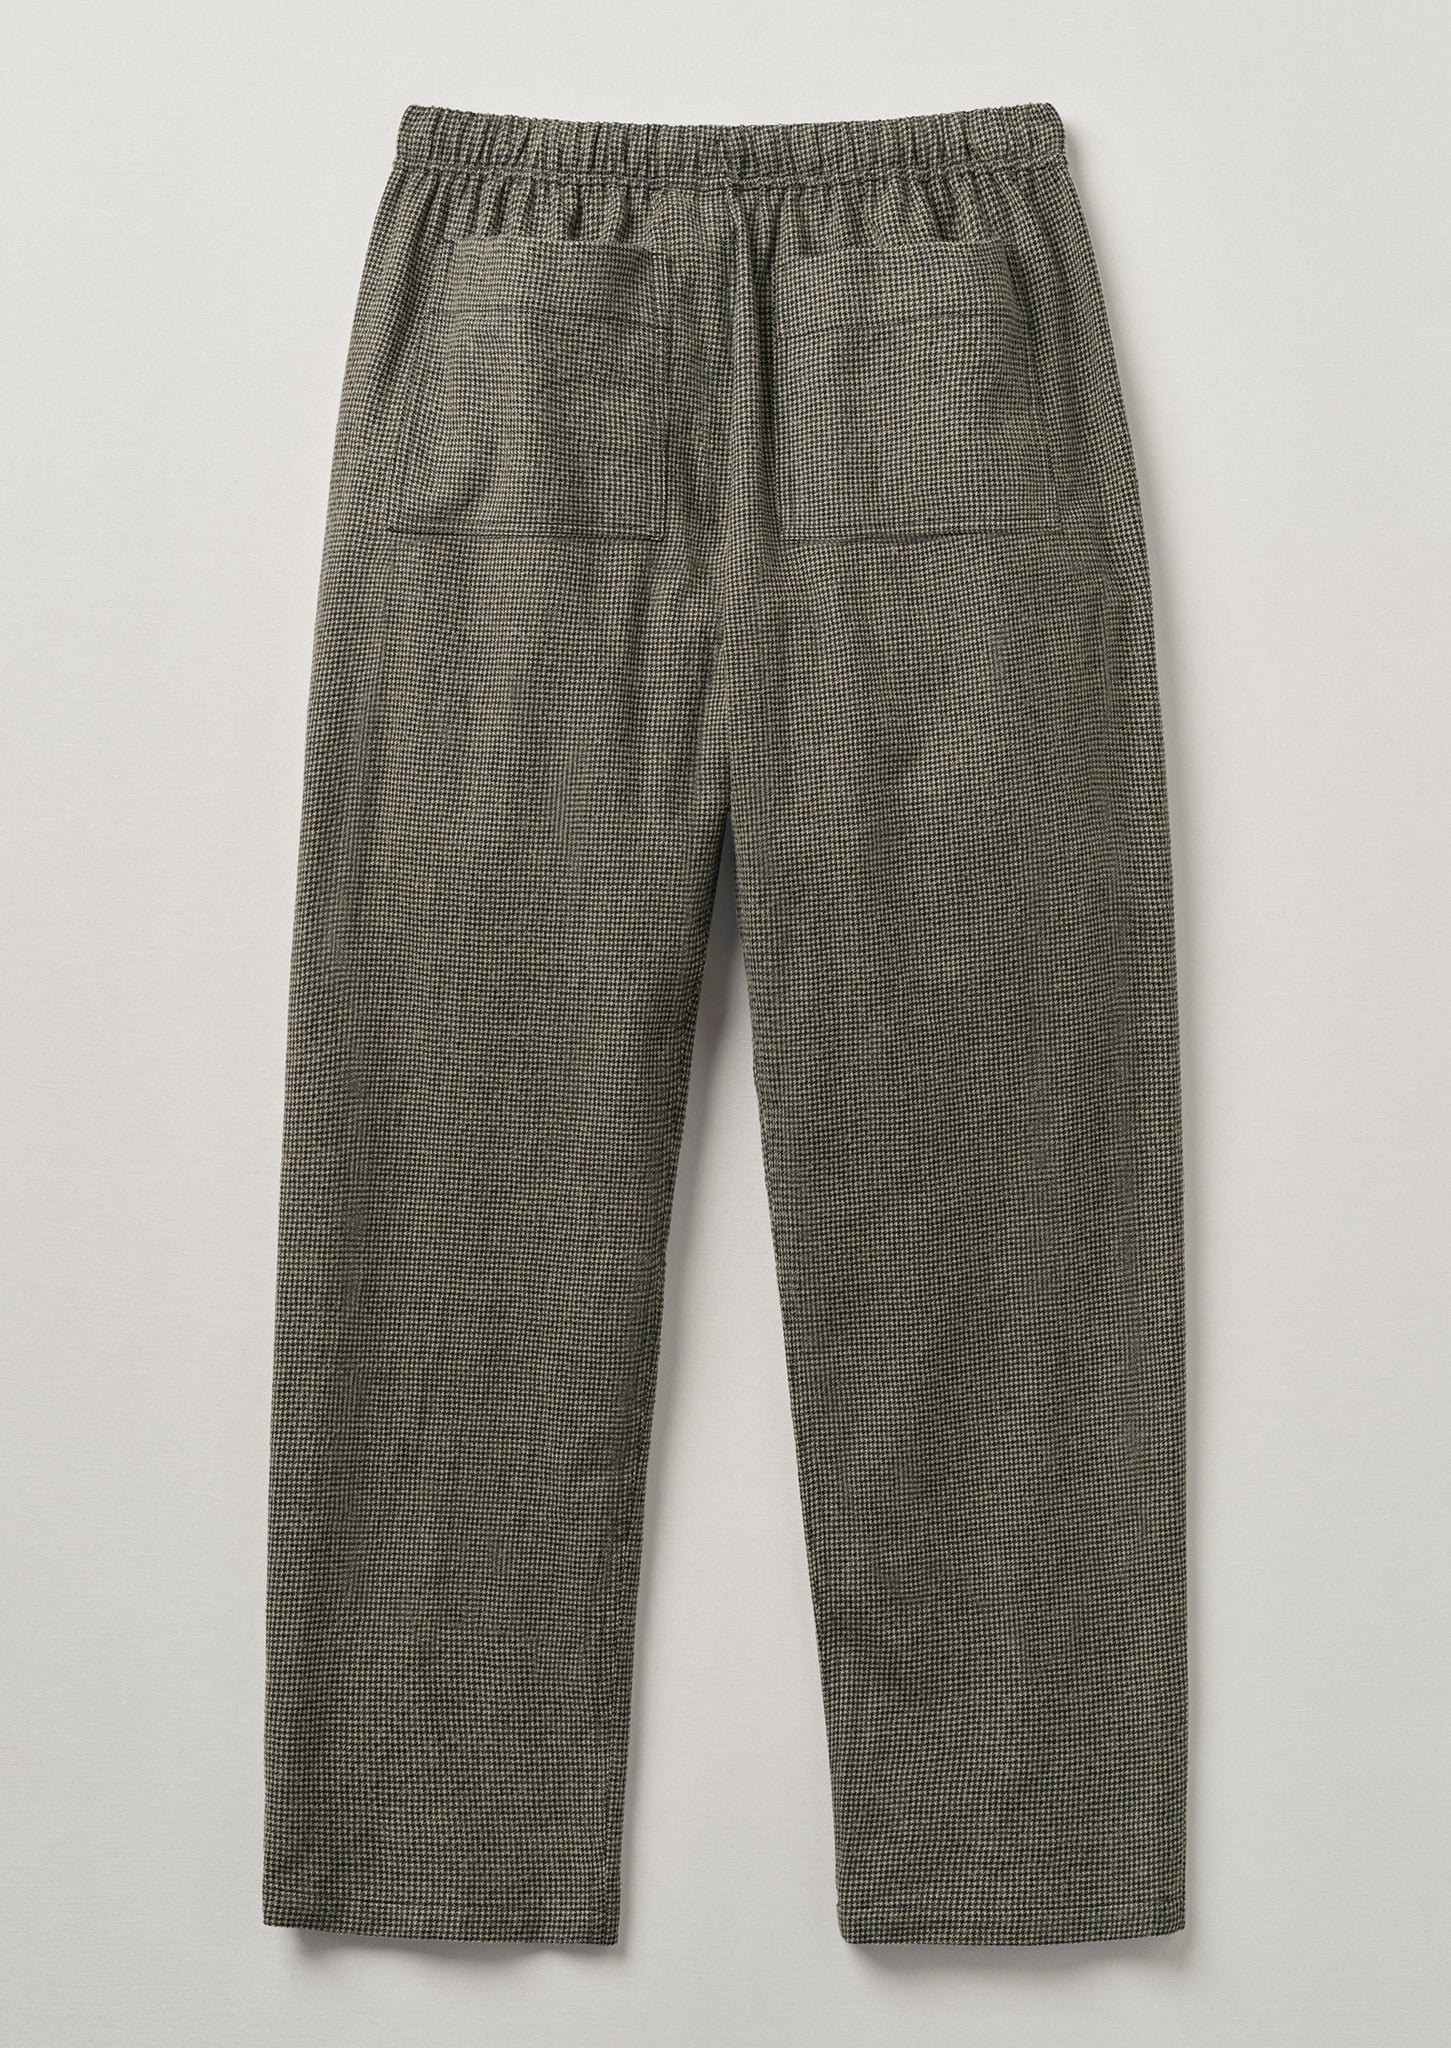 Why drawstring pants ideal men's back-to-work trousers?